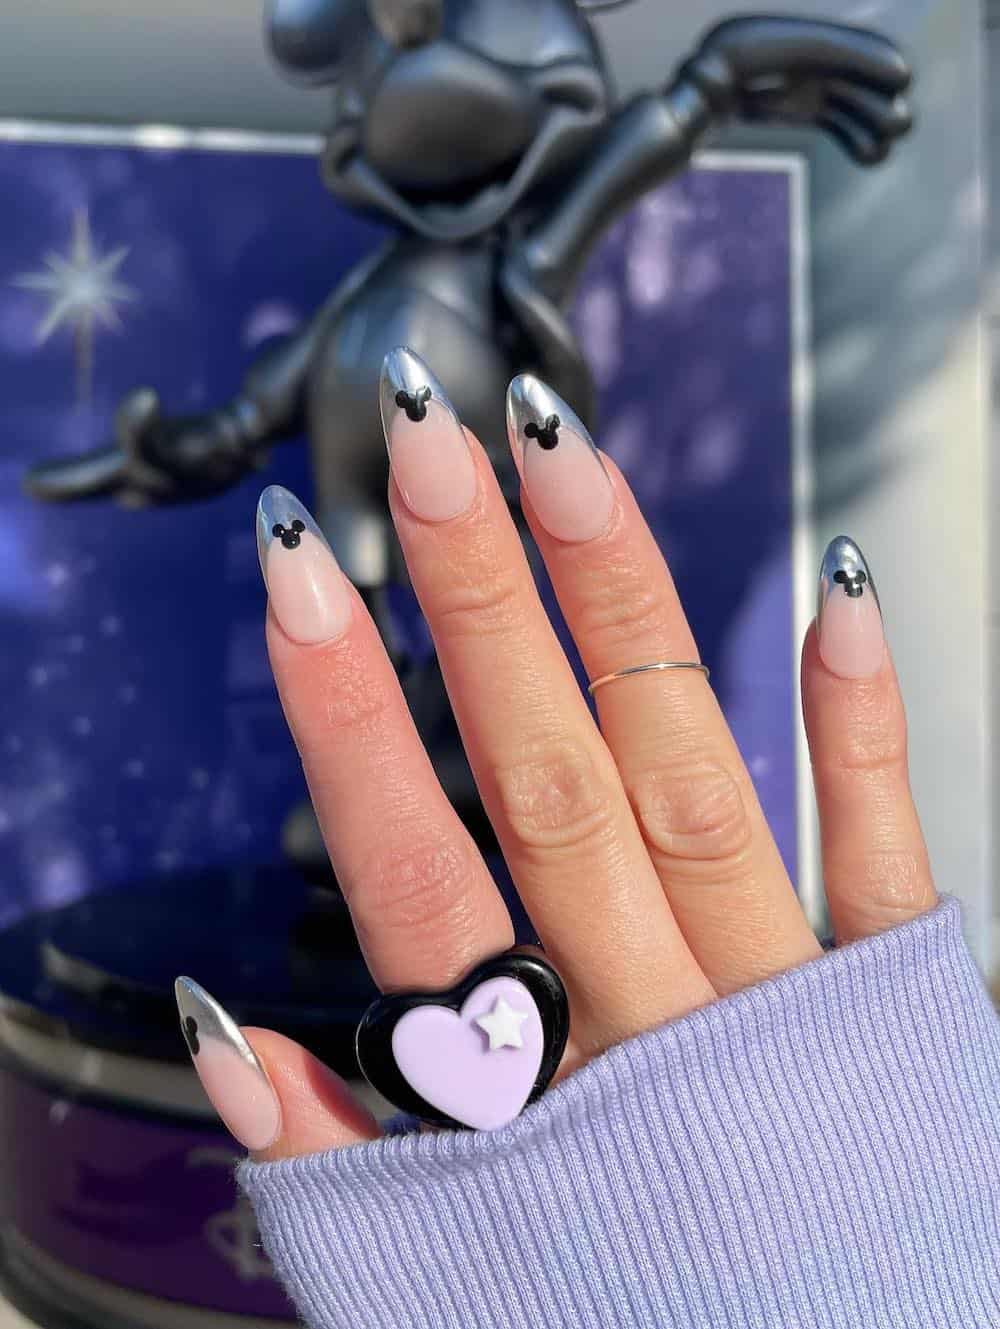 Medium almond nails with a Mickey Mouse design featuring metallic silver tips and black Mickey silhouettes